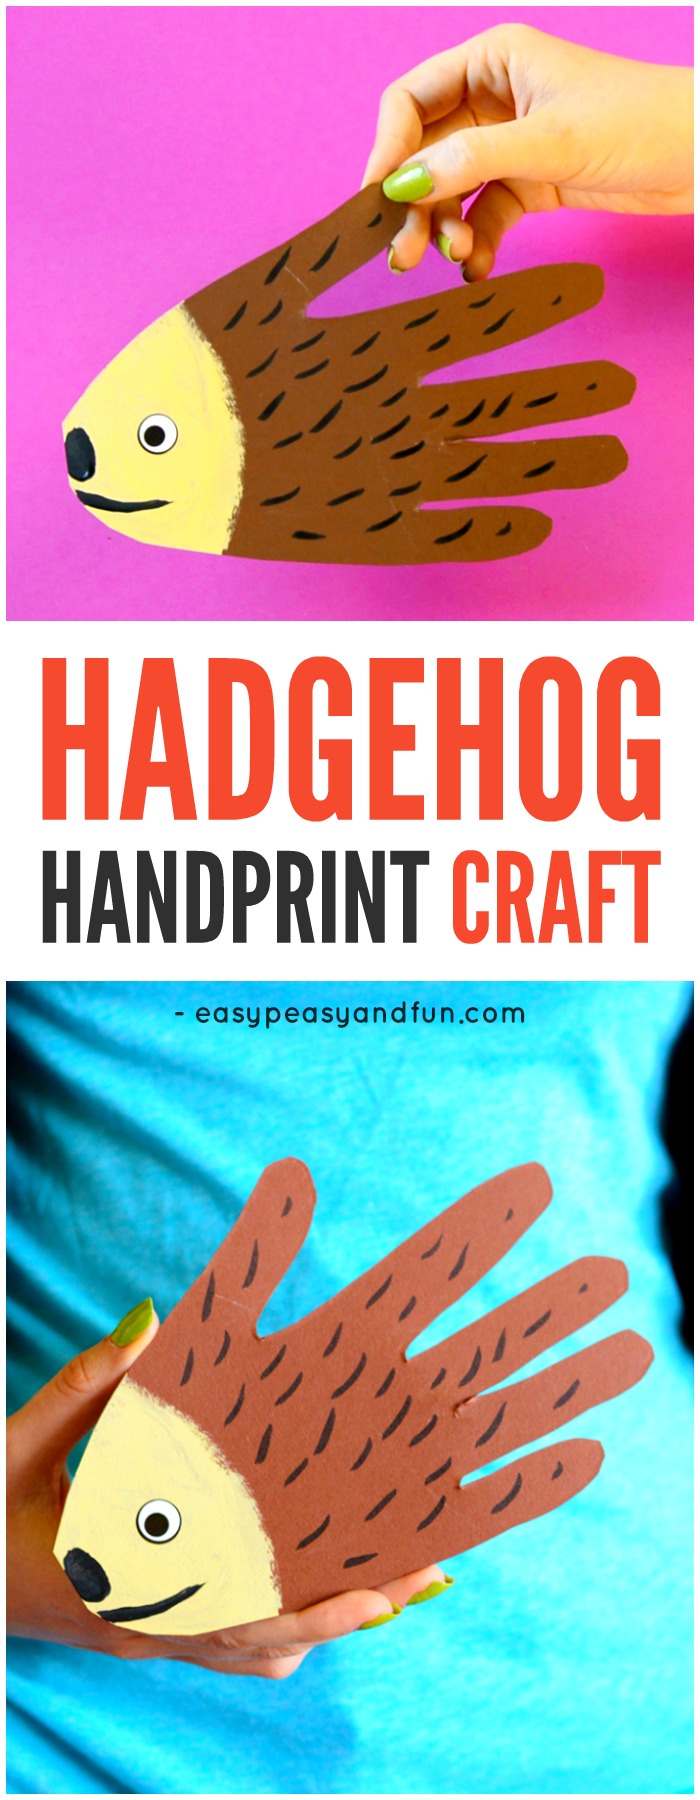 Handprint Hedgehog Craft for Kids. Simple Fall Craft Idea for Kids to Make with Paper.